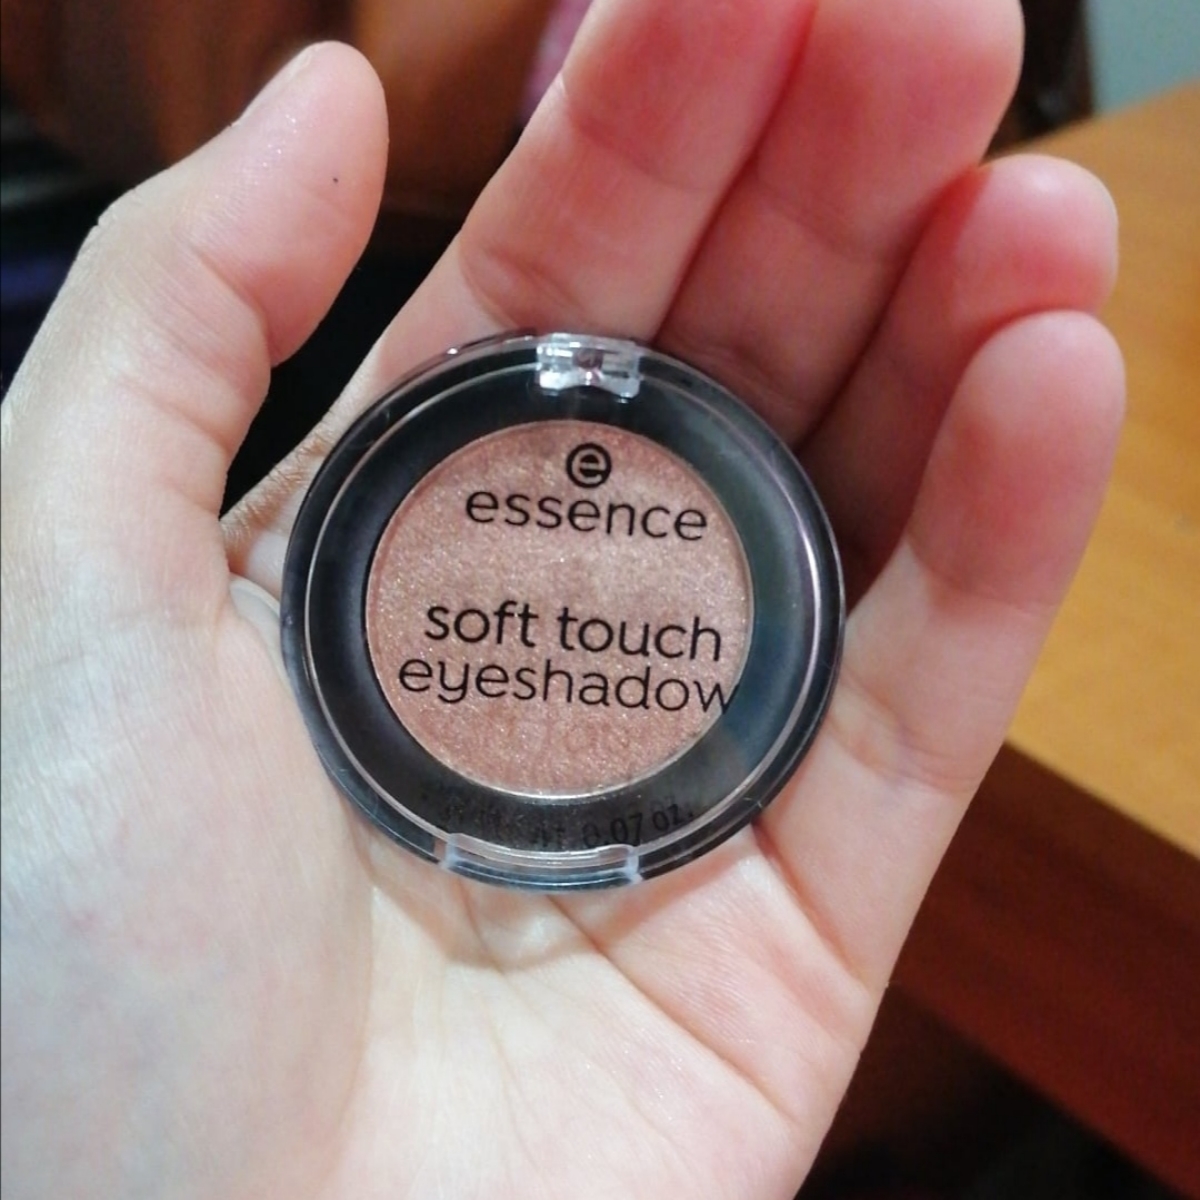 Essence Soft touch eyeshadow Review | abillion